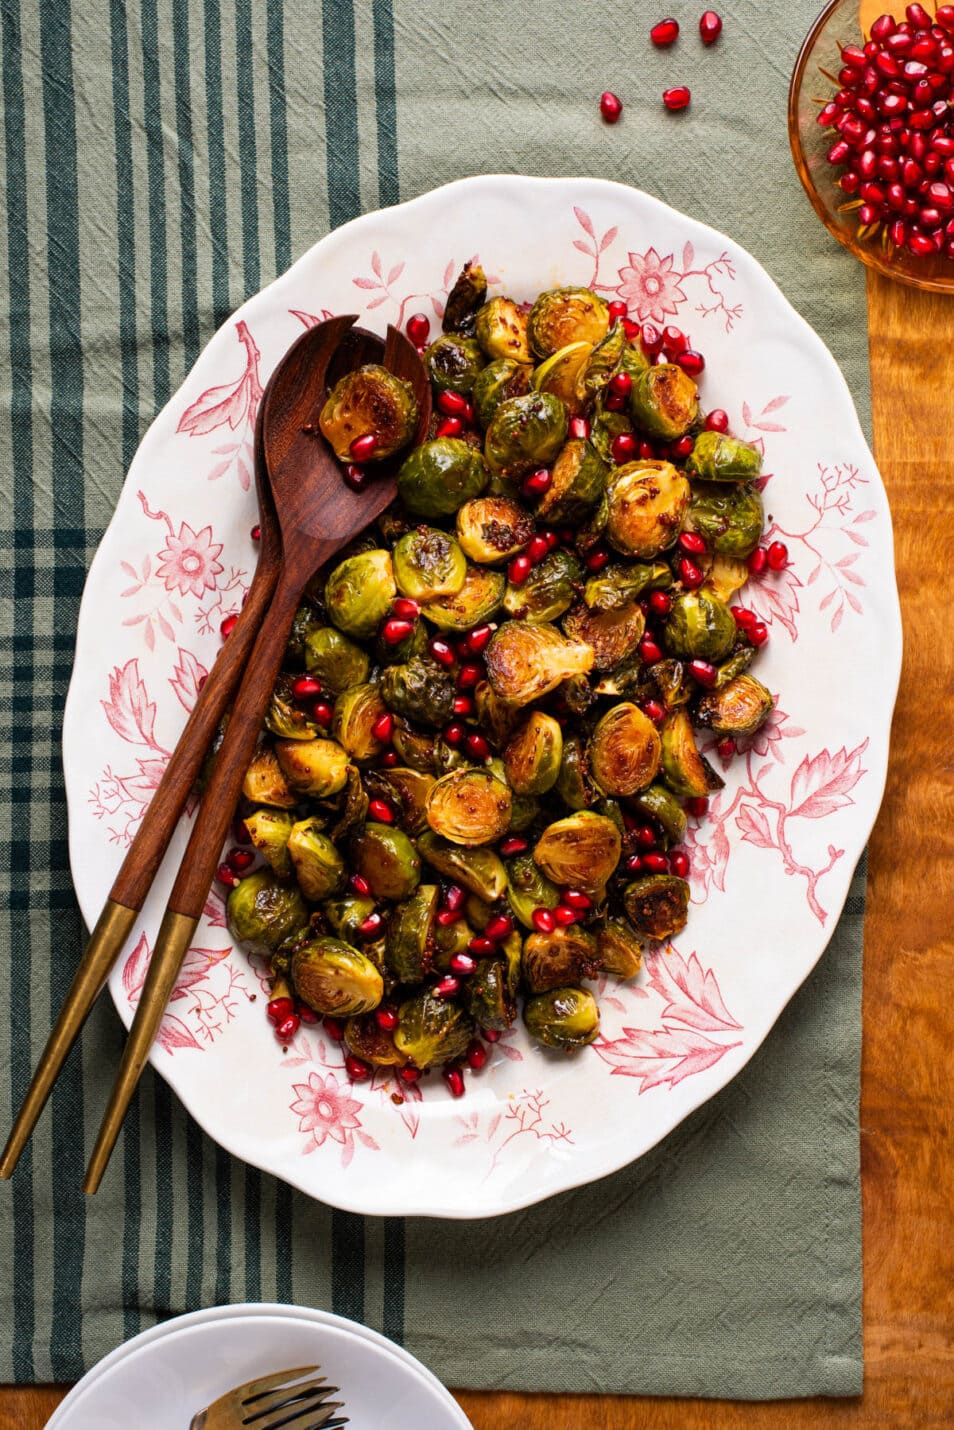 Charred Brussels sprouts with balsamic glaze and pomegranate on a vintage floral platter next to a broken pomegranate